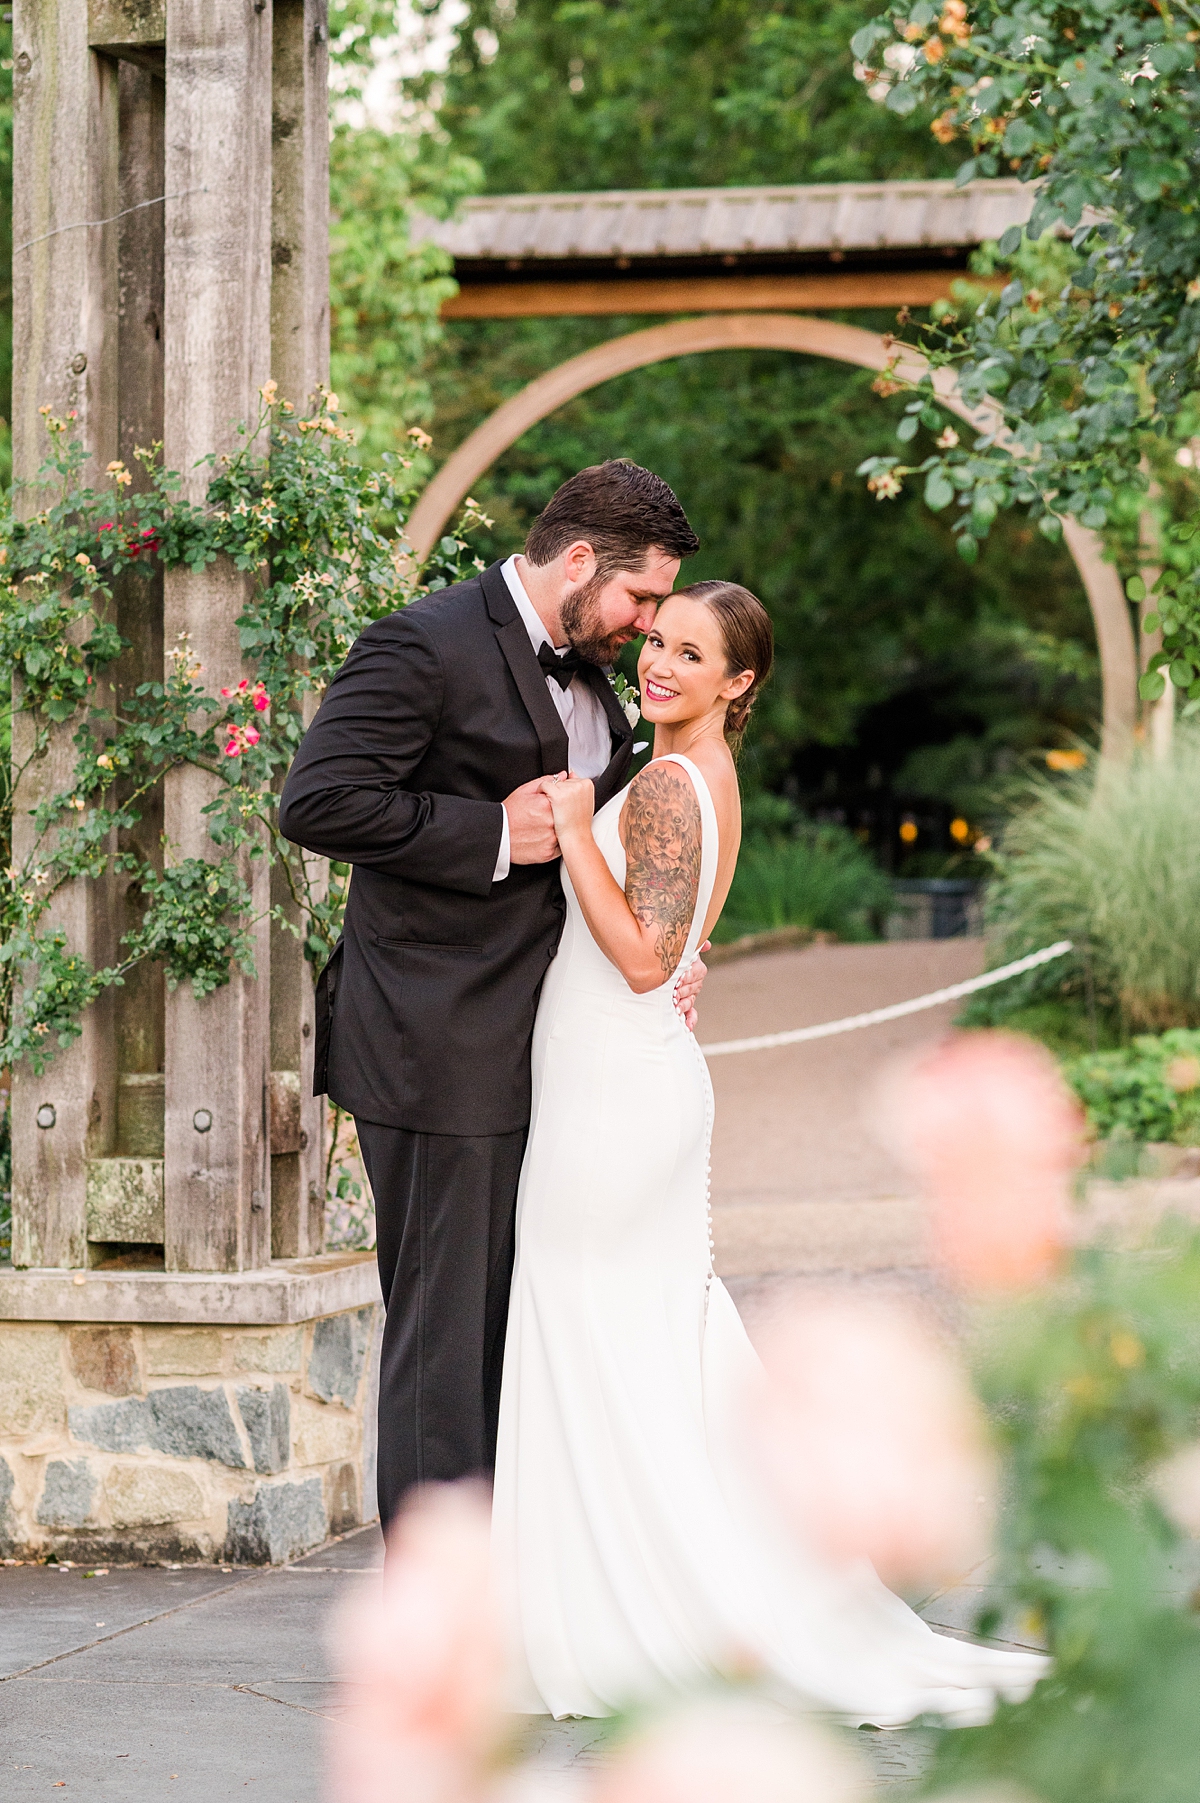 Bride and Groom Portraits at Spring Lewis Ginter Botanical Garden Wedding. Wedding Photography by Richmond Wedding Photographer Kailey Brianne Photography. 